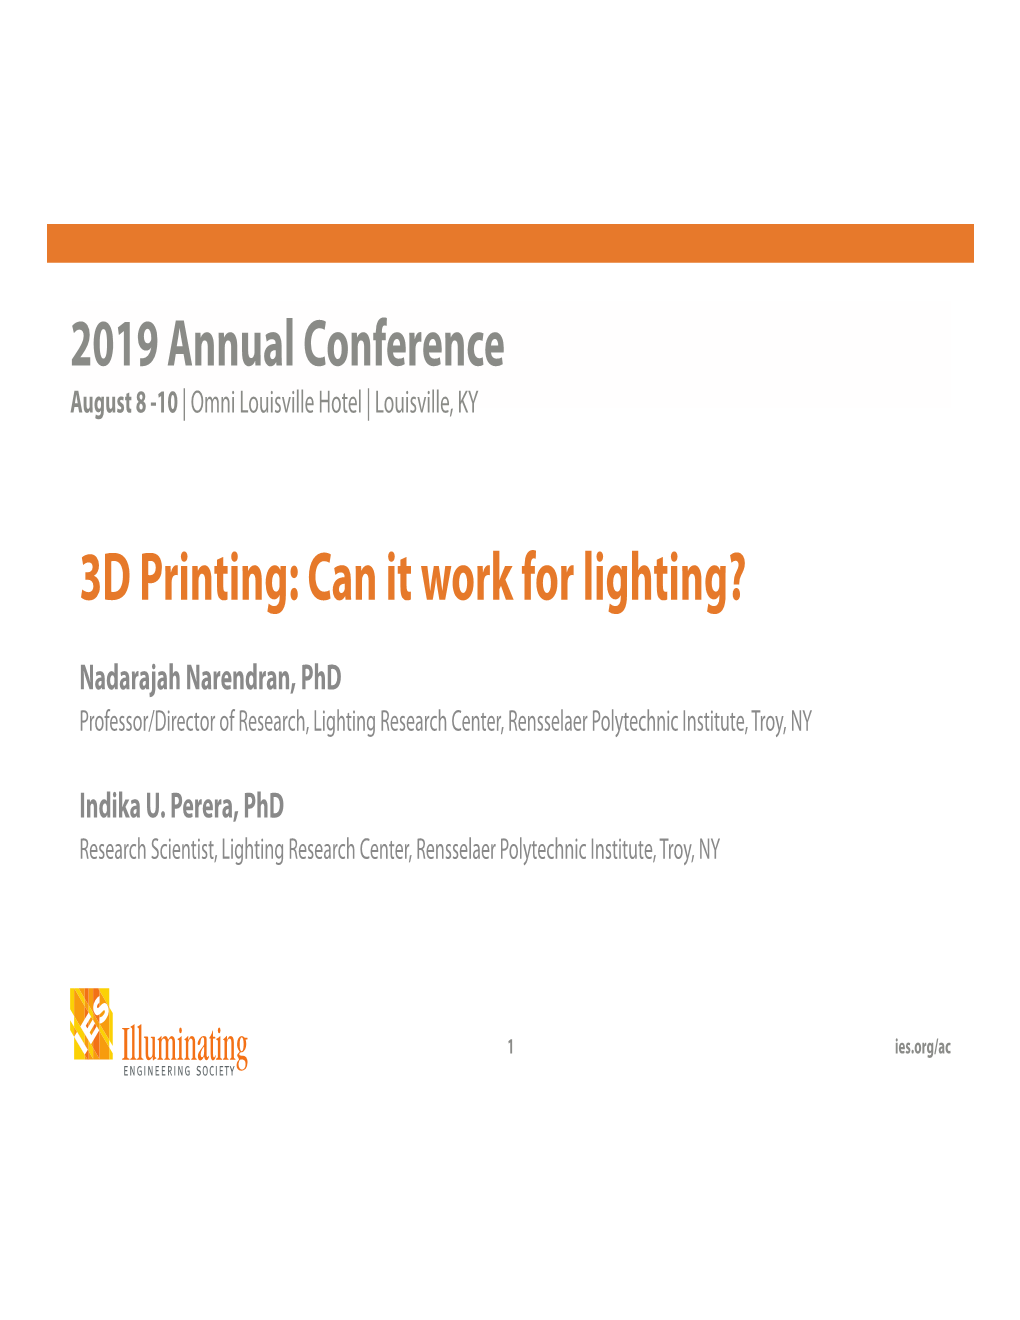 3D Printing: Can It Work for Lighting?